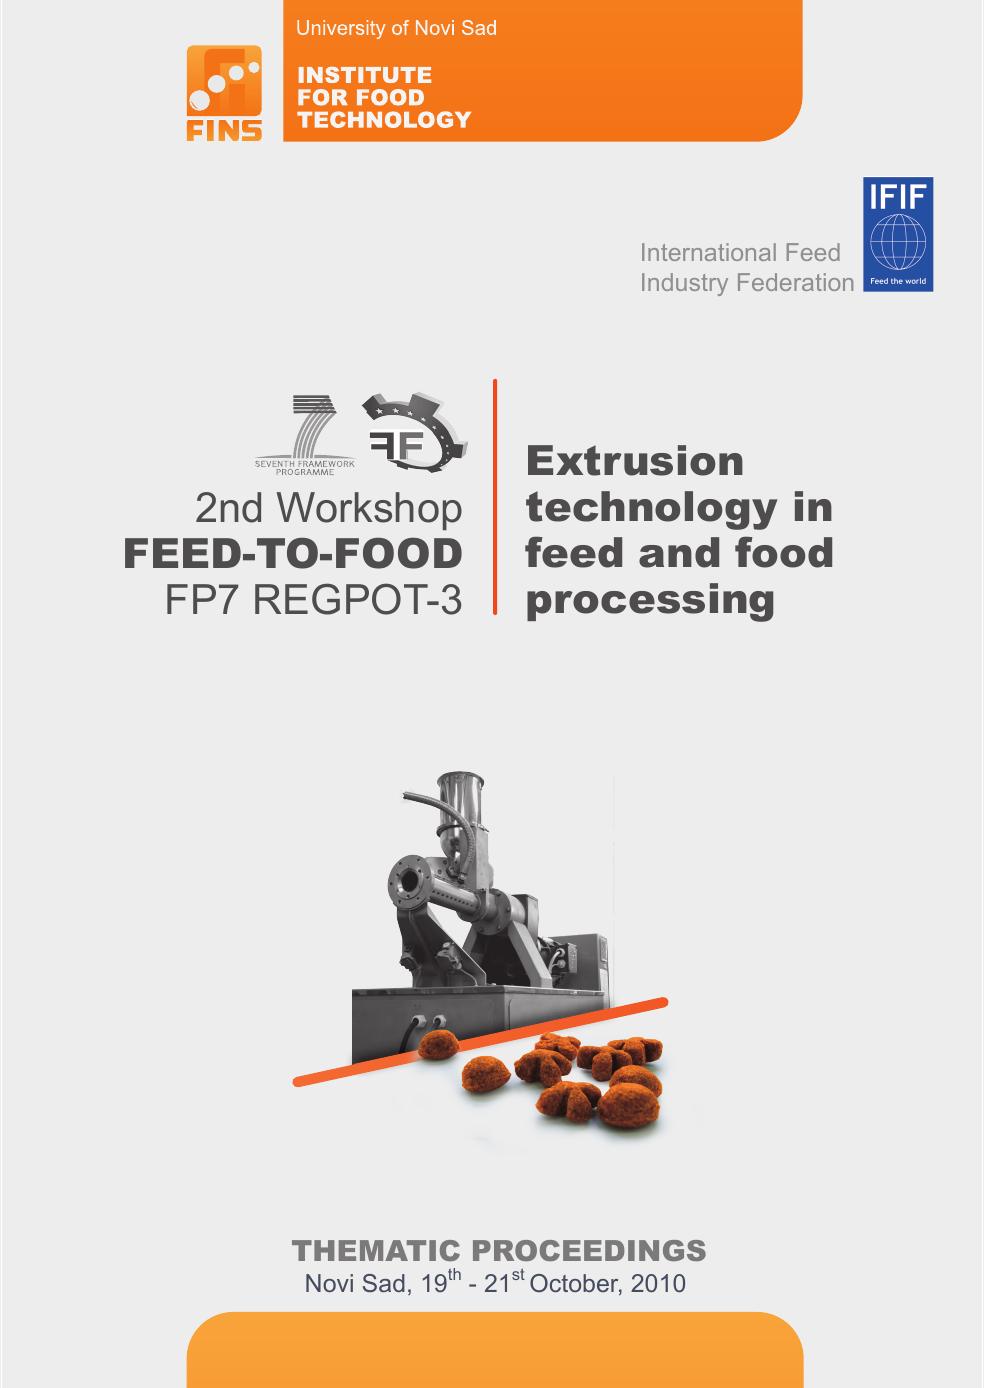 EXTRUSION TECHNOLOGY IN FEED AND FOOD PROCESSING 2010